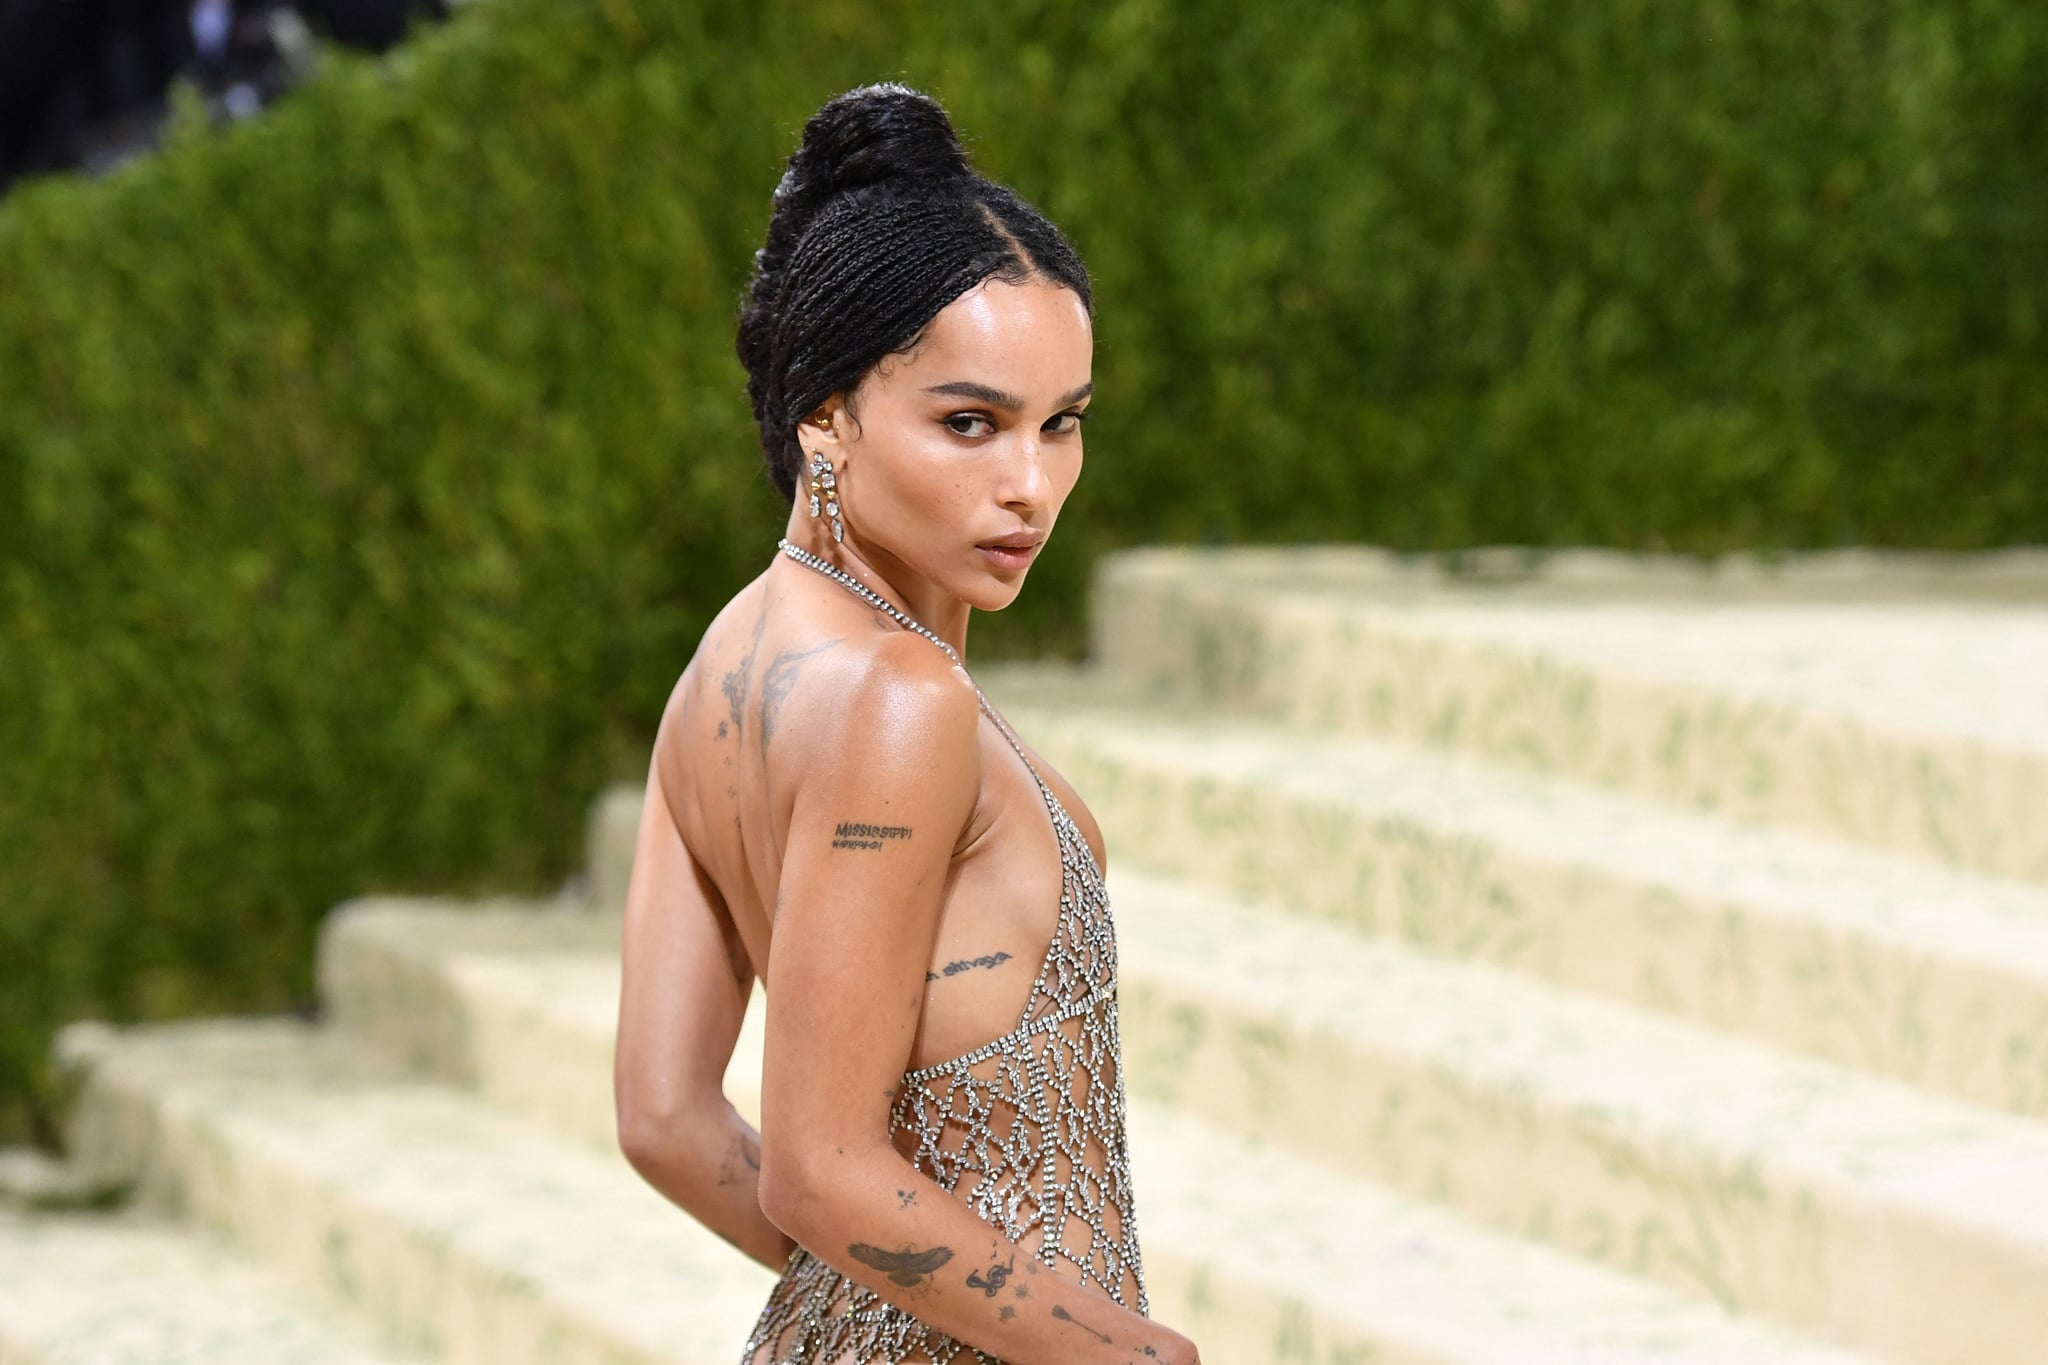 US actress Zoe Kravitz arrives for the 2021 Met Gala at the Metropolitan Museum of Art on September 13, 2021 in New York. - This year's Met Gala has a distinctively youthful imprint, hosted by singer Billie Eilish, actor Timothee Chalamet, poet Amanda Gorman and tennis star Naomi Osaka, none of them older than 25. The 2021 theme is 